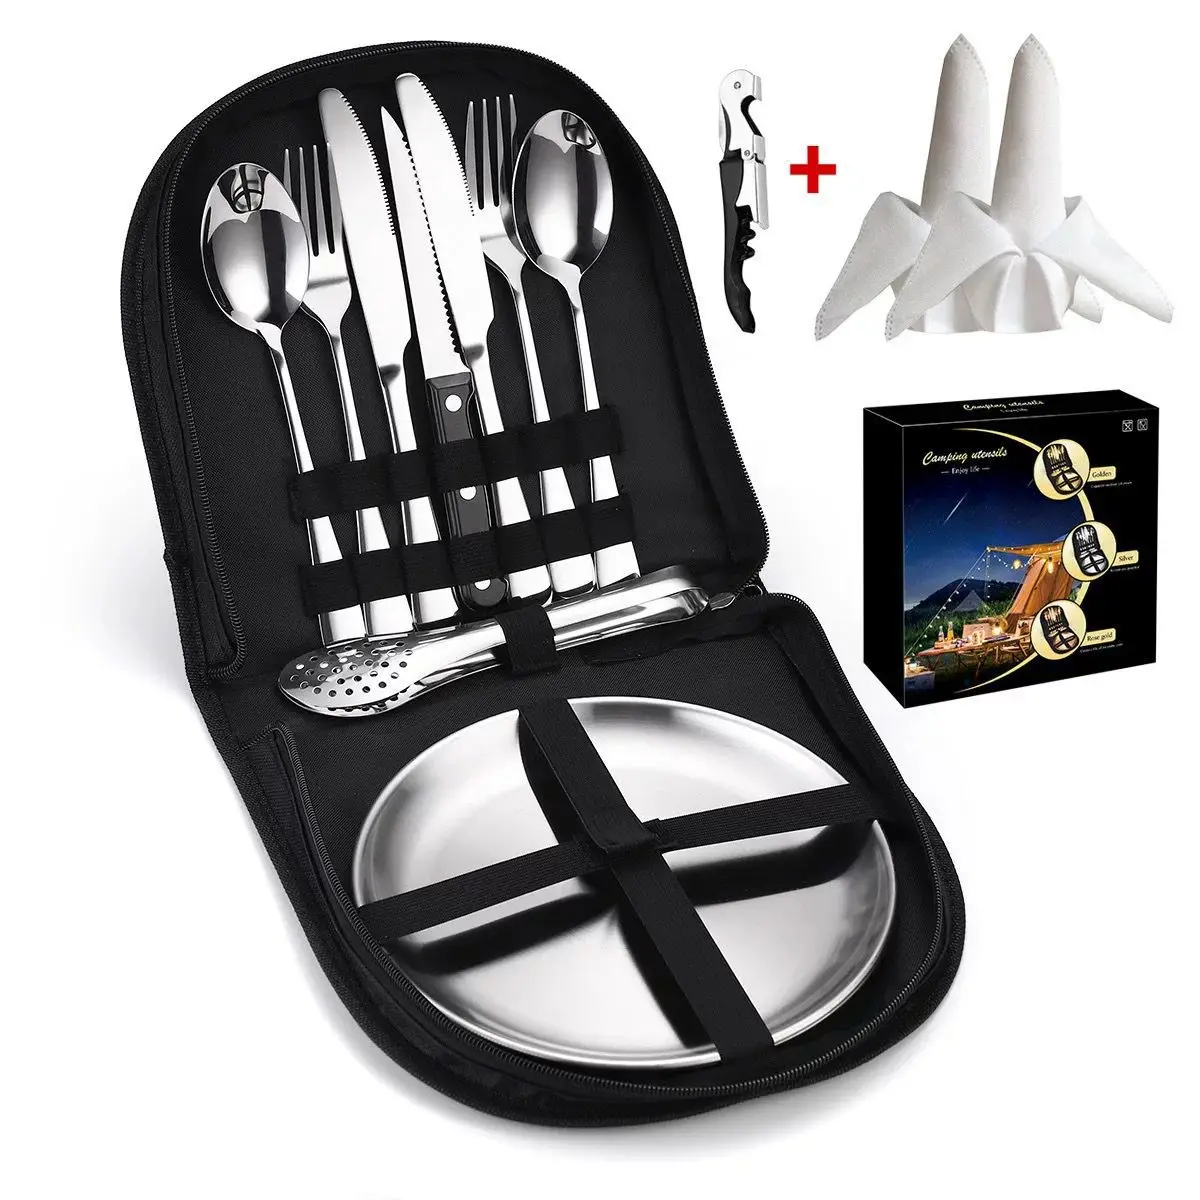 

Portable Stainless Steel Cutlery Knife Fork Spoon Premium Silver Outdoor Camping BBQ Resable Cutlery Set Camping Picnic Kit